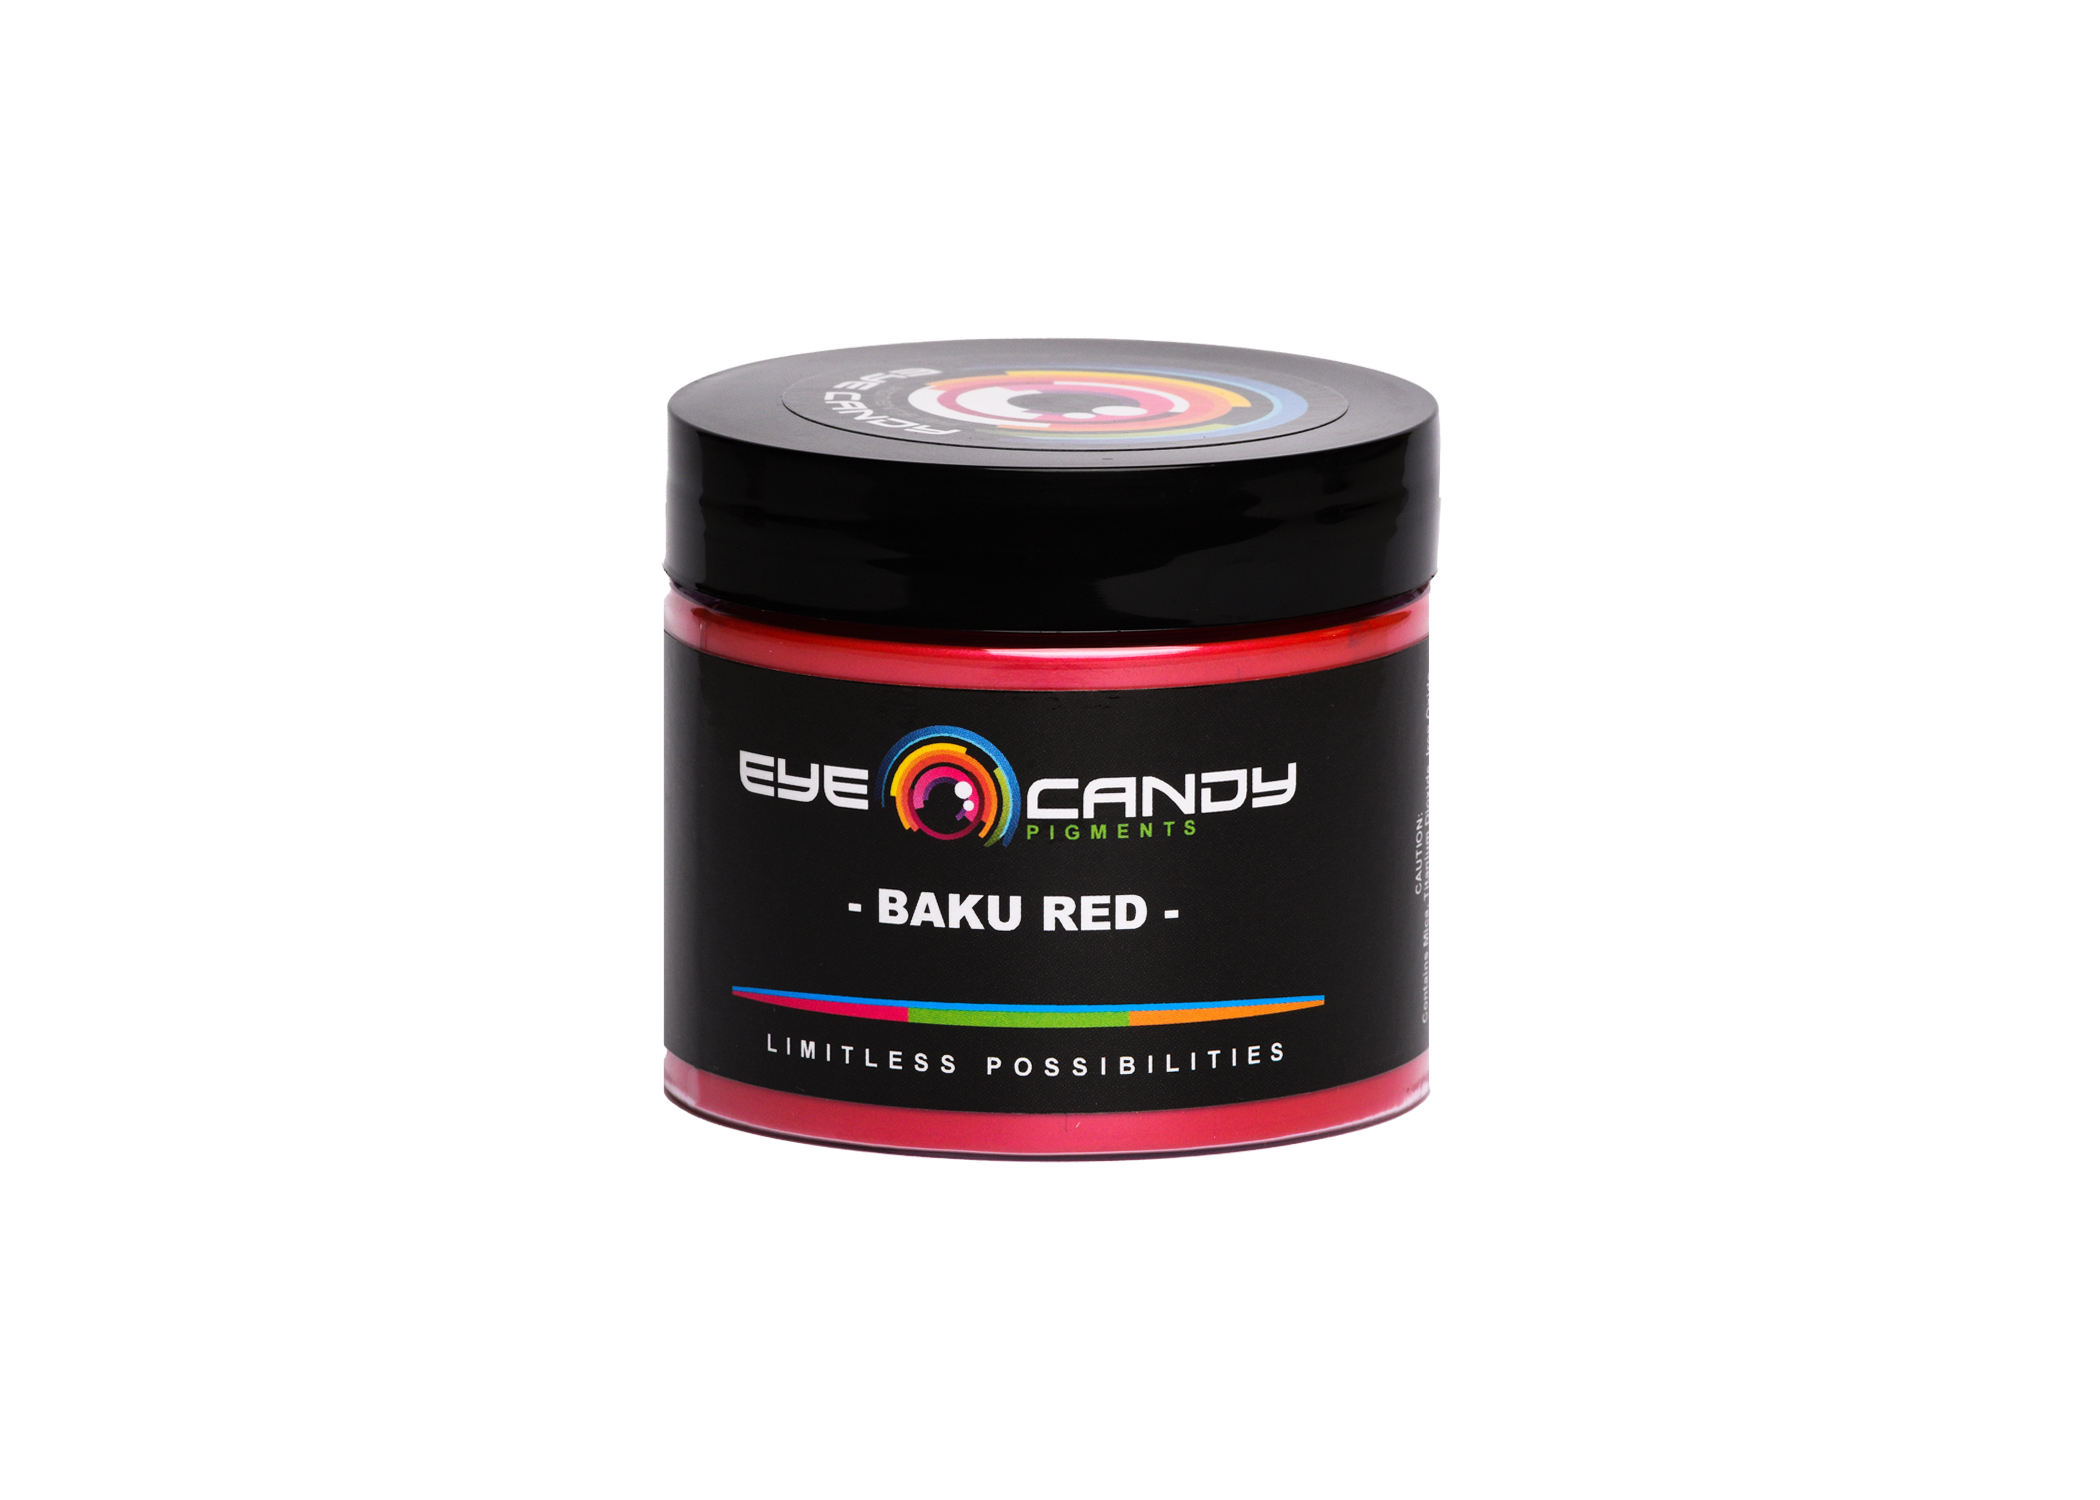 Blood Red - Professional grade mica powder pigment – The Epoxy Resin Store